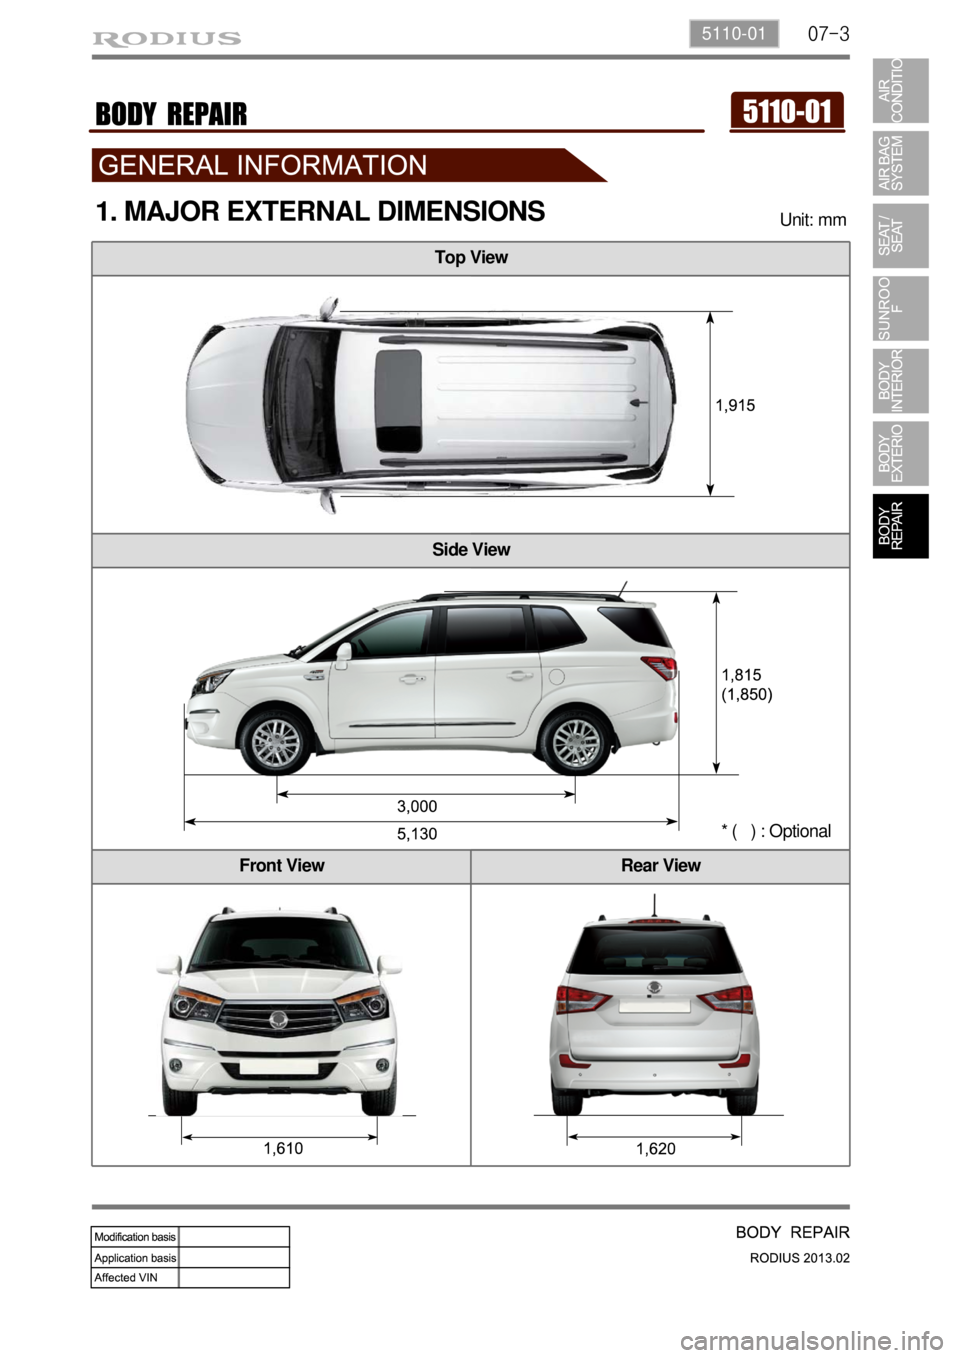 SSANGYONG TURISMO 2013  Service Manual 07-35110-01
Top View
Side View
Front View Rear View
1. MAJOR EXTERNAL DIMENSIONSUnit: mm
* (   ) : Optional 